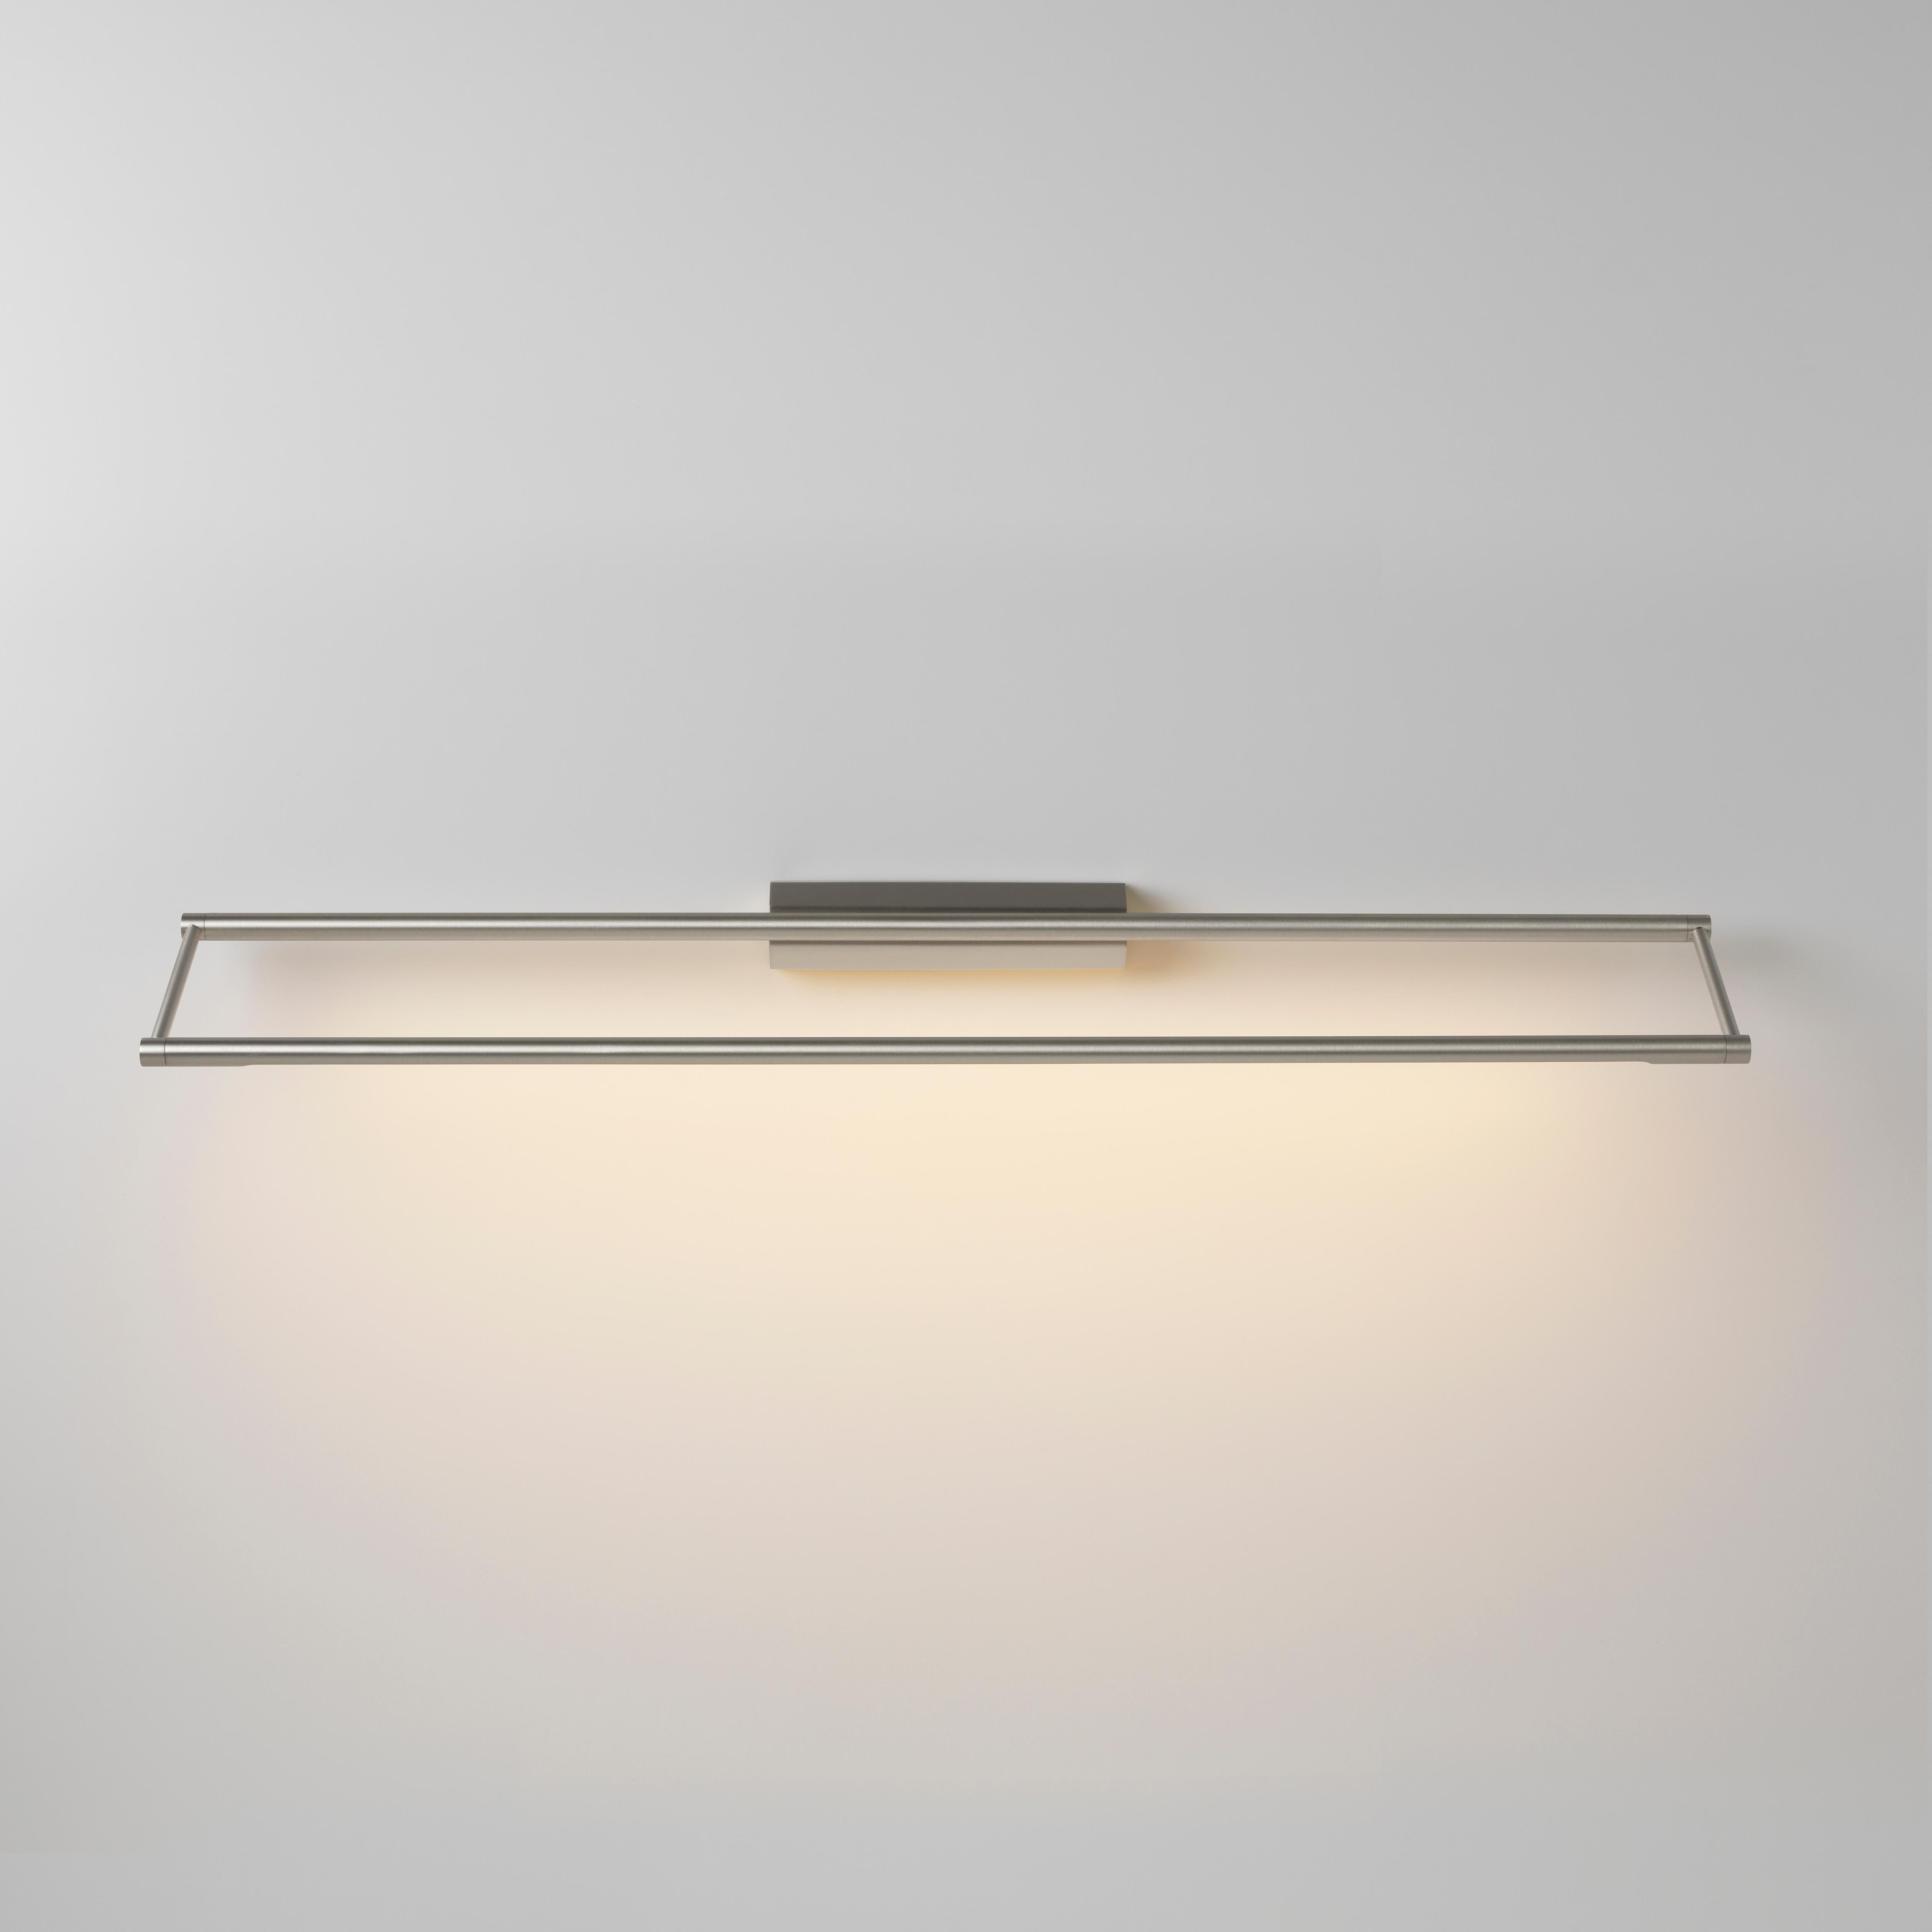 Link 725 Nickel wall light by Emilie Cathelineau
Dimensions: D 72.5 x W 11.5 x H 4.4 cm
Materials: Solid brass, Satin Polycarbonate diffuser, Black textile cable (2m)
Others finishes and dimensions are available.

All our lamps can be wired